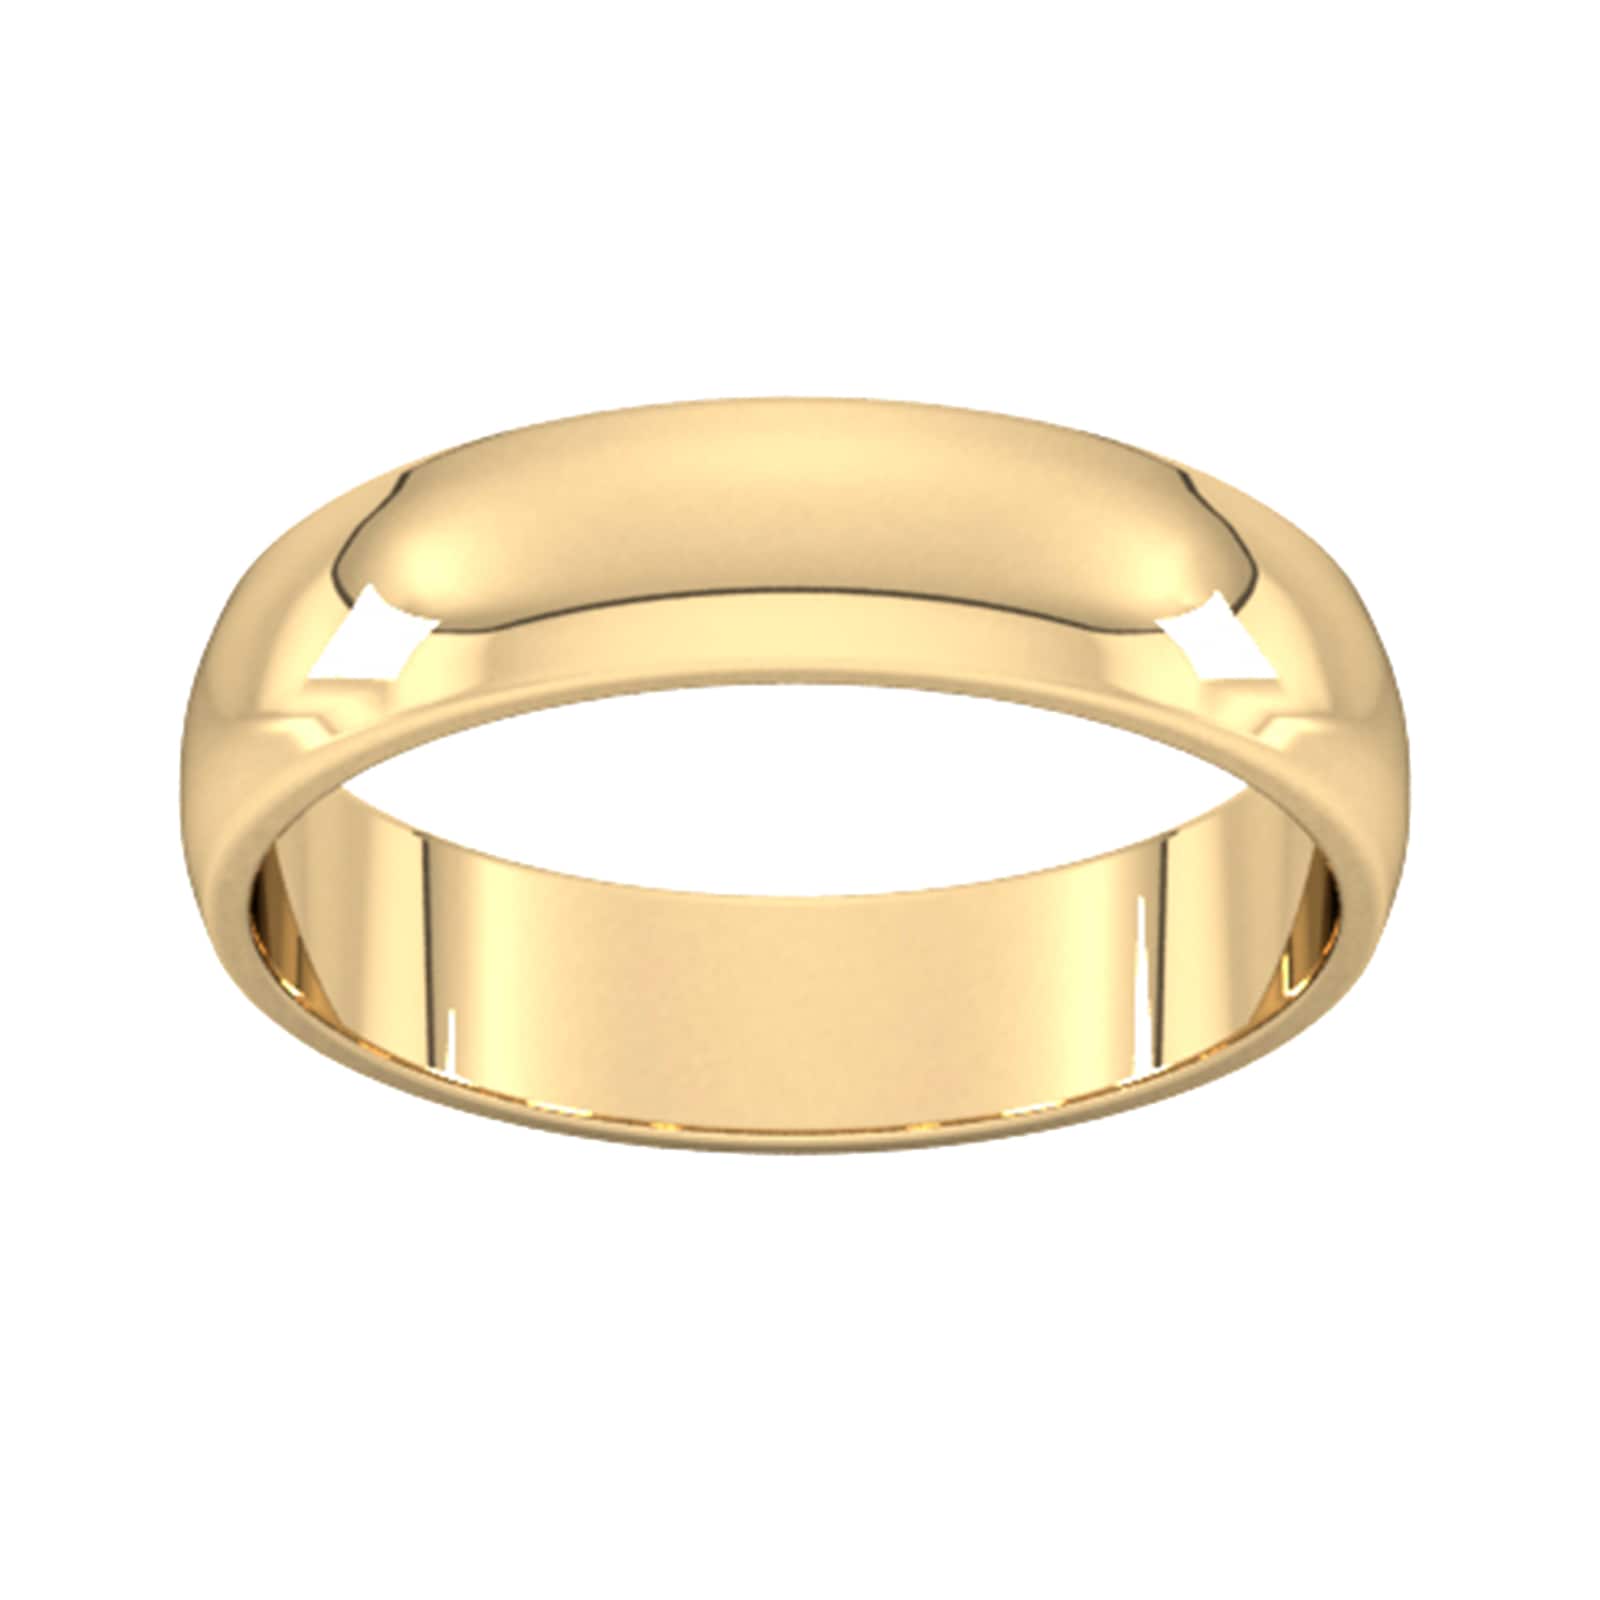 5mm D Shape Standard Wedding Ring In 18 Carat Yellow Gold - Ring Size O